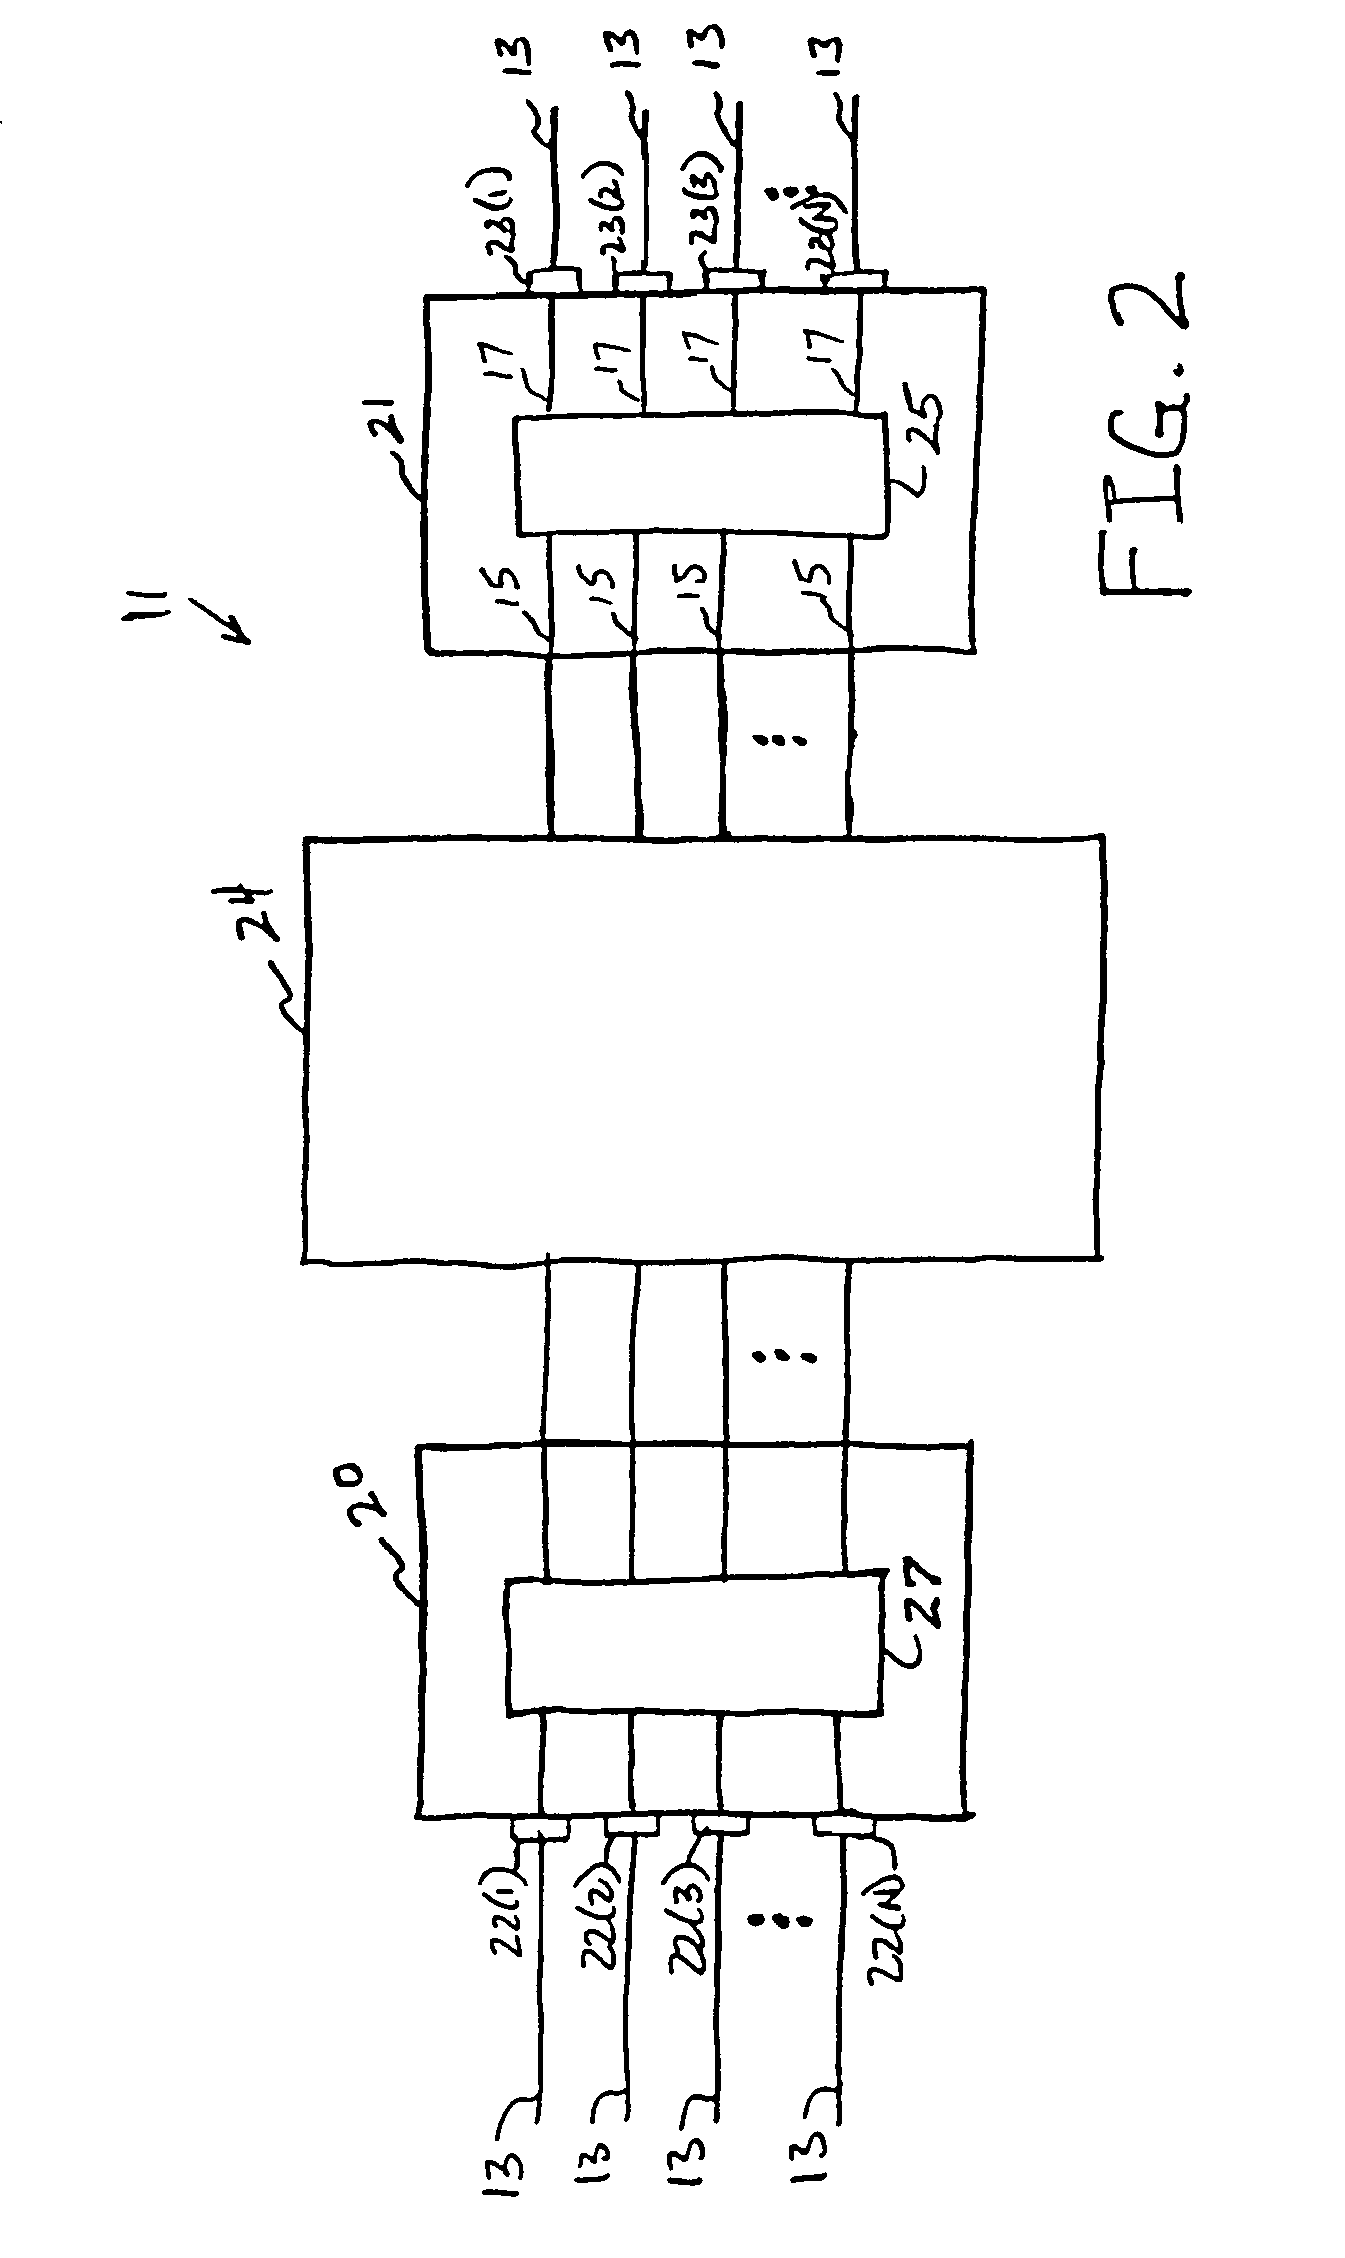 Apparatus and method for controlling queuing of data at a node on a network